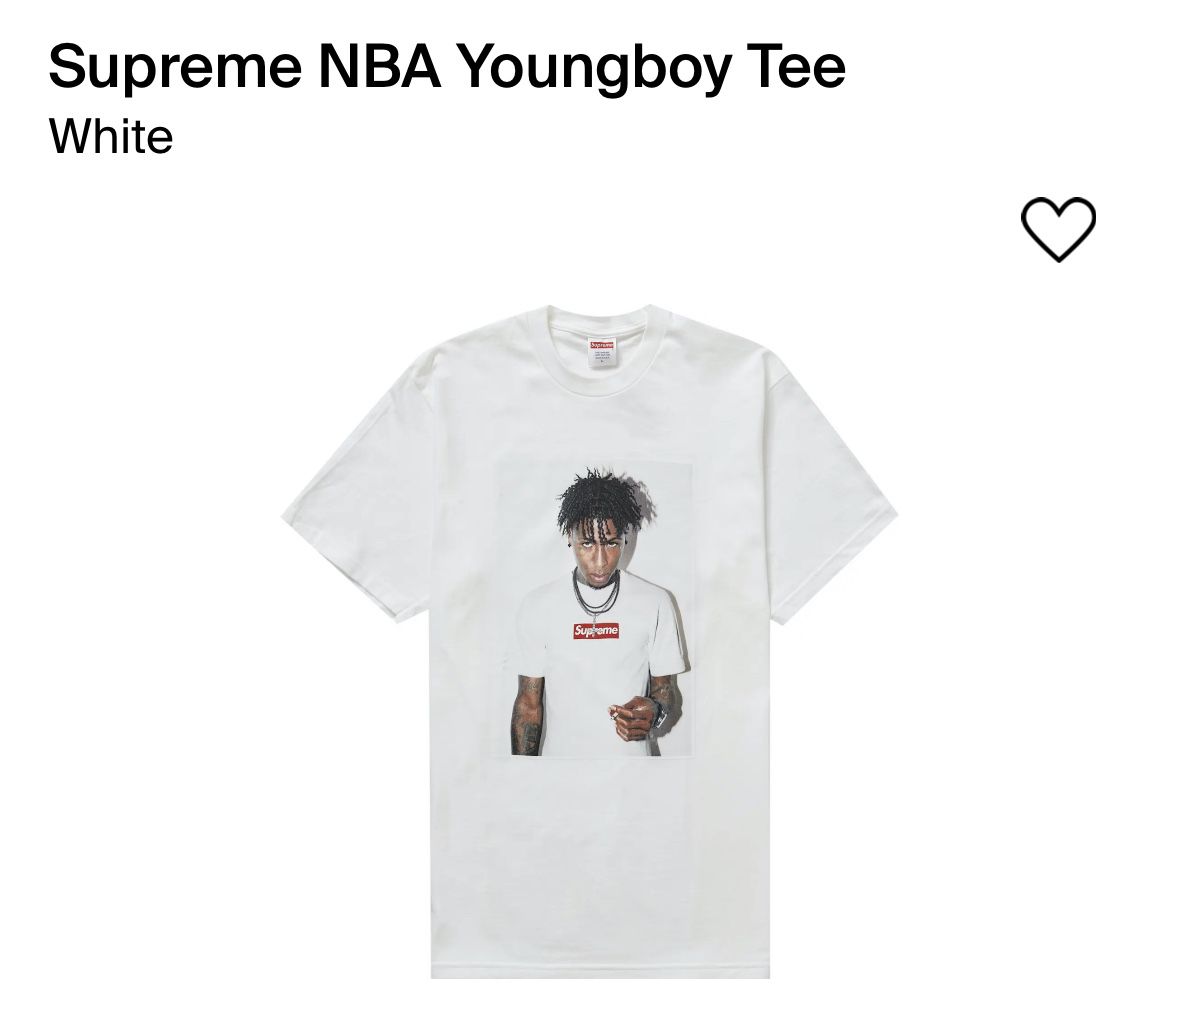 Supreme NBA YoungBoy Tee for Sale in Brooklyn, NY - OfferUp